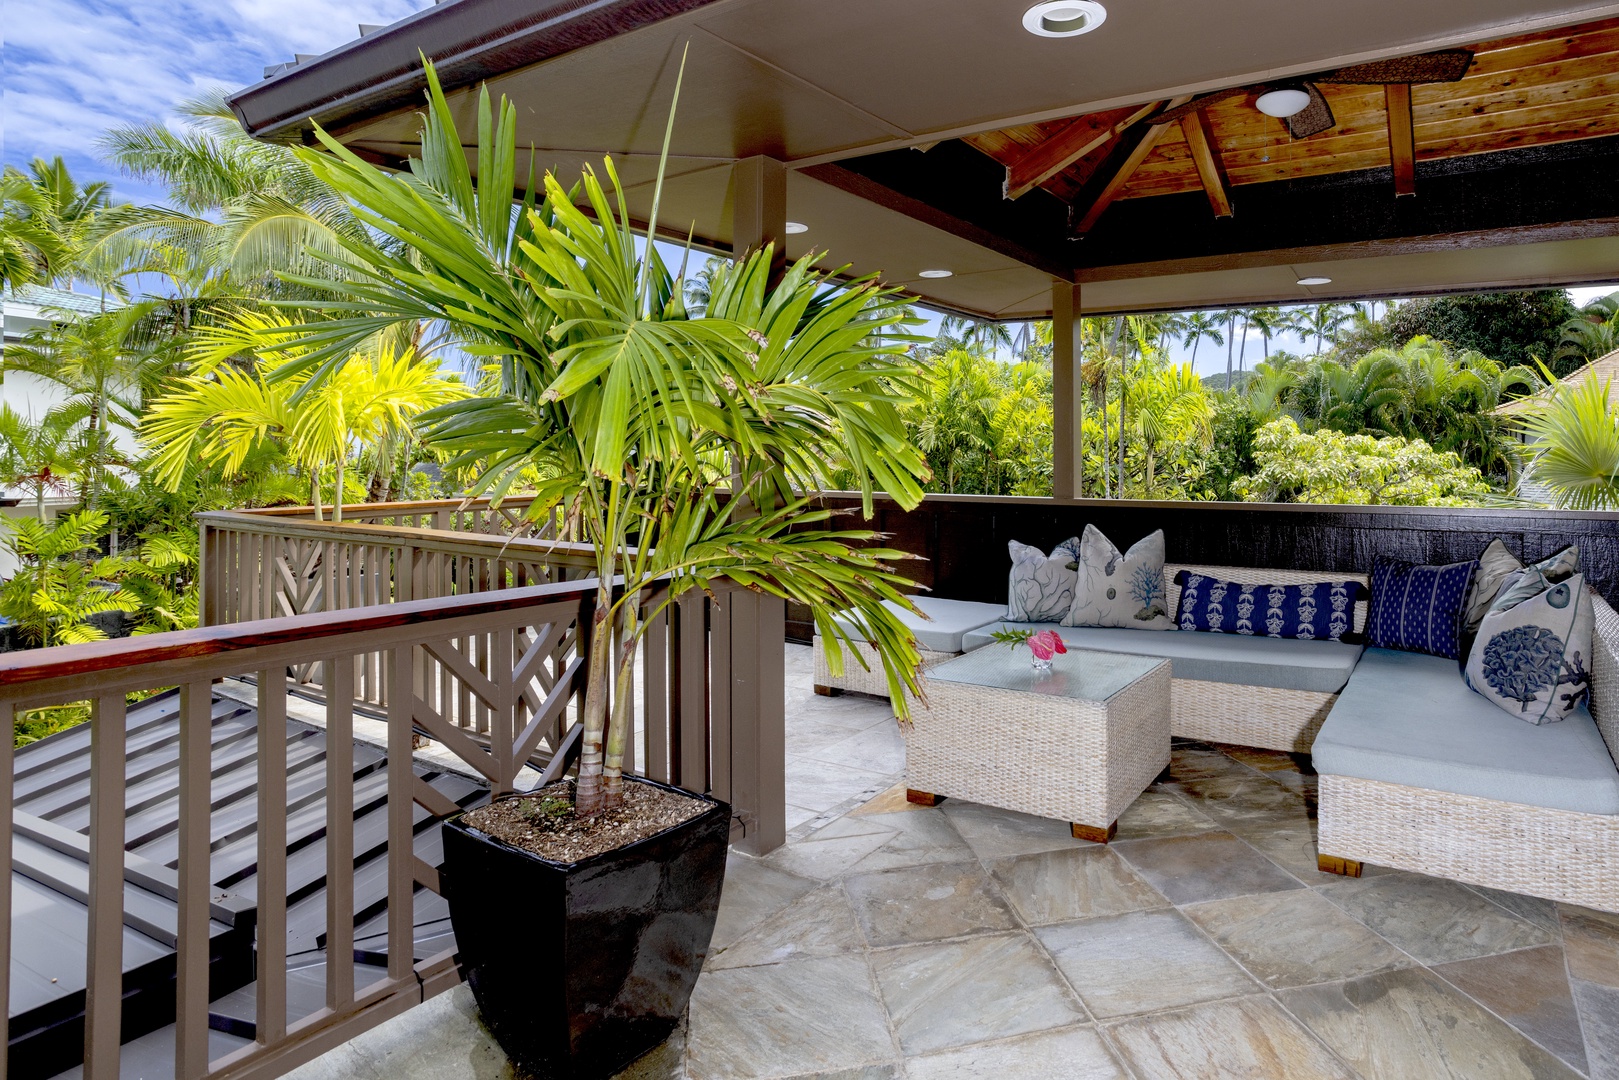 Kailua Vacation Rentals, Mokulua Seaside - Private lanai in the primary ensuite with daybeds for outdoor relaxation